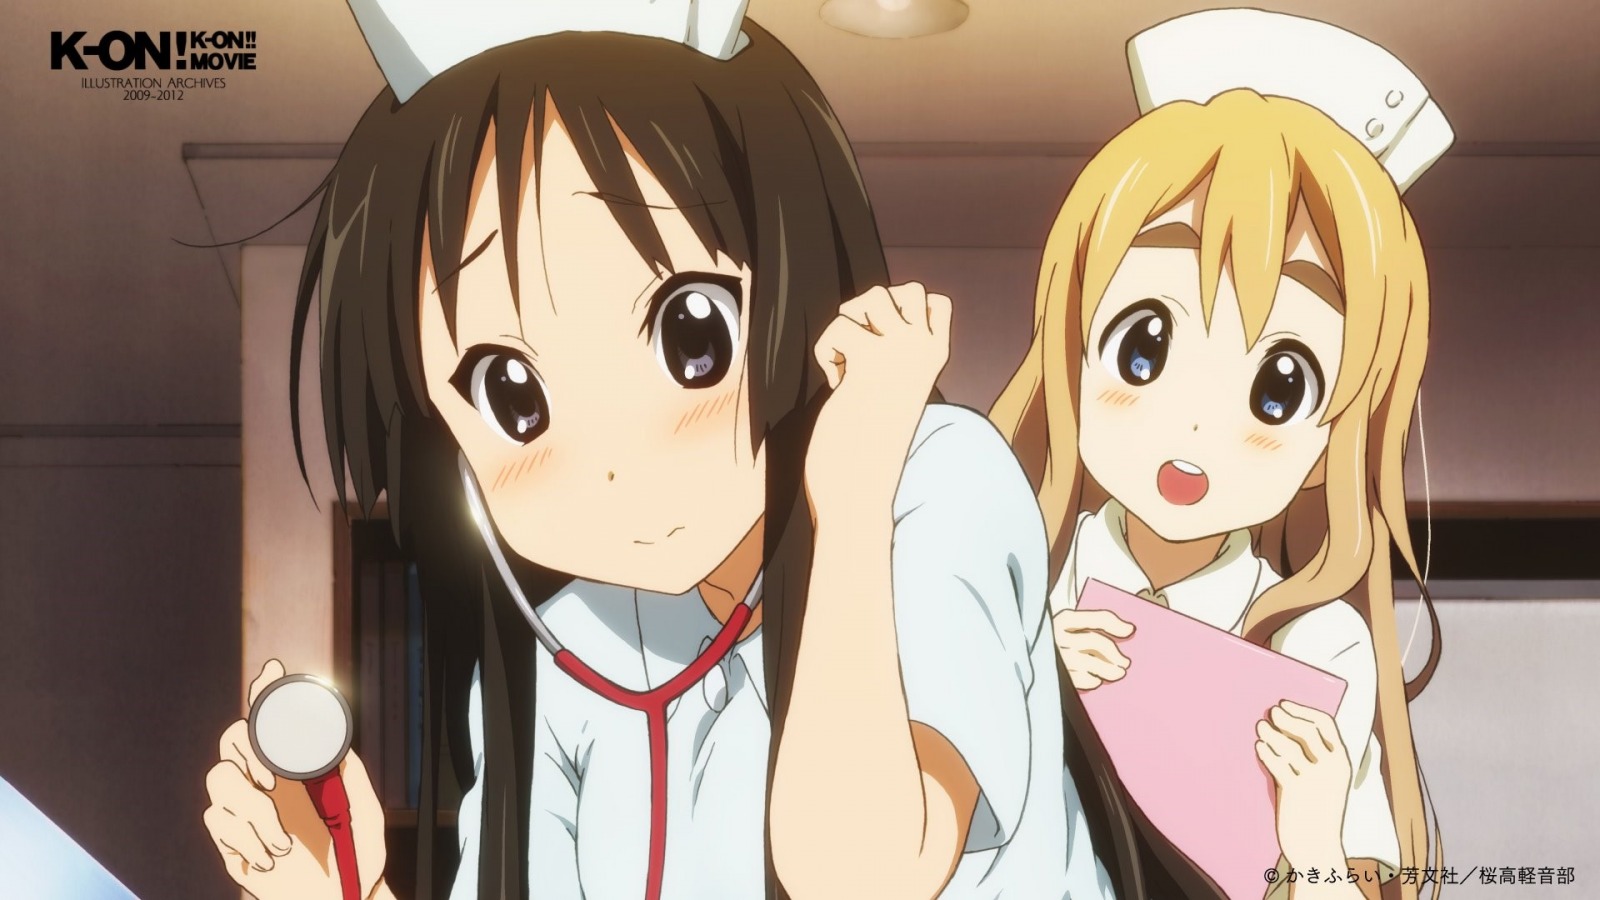 K-ON! IILUSTRATION ARCHIEVES 2009-2012 P.3 [P9]